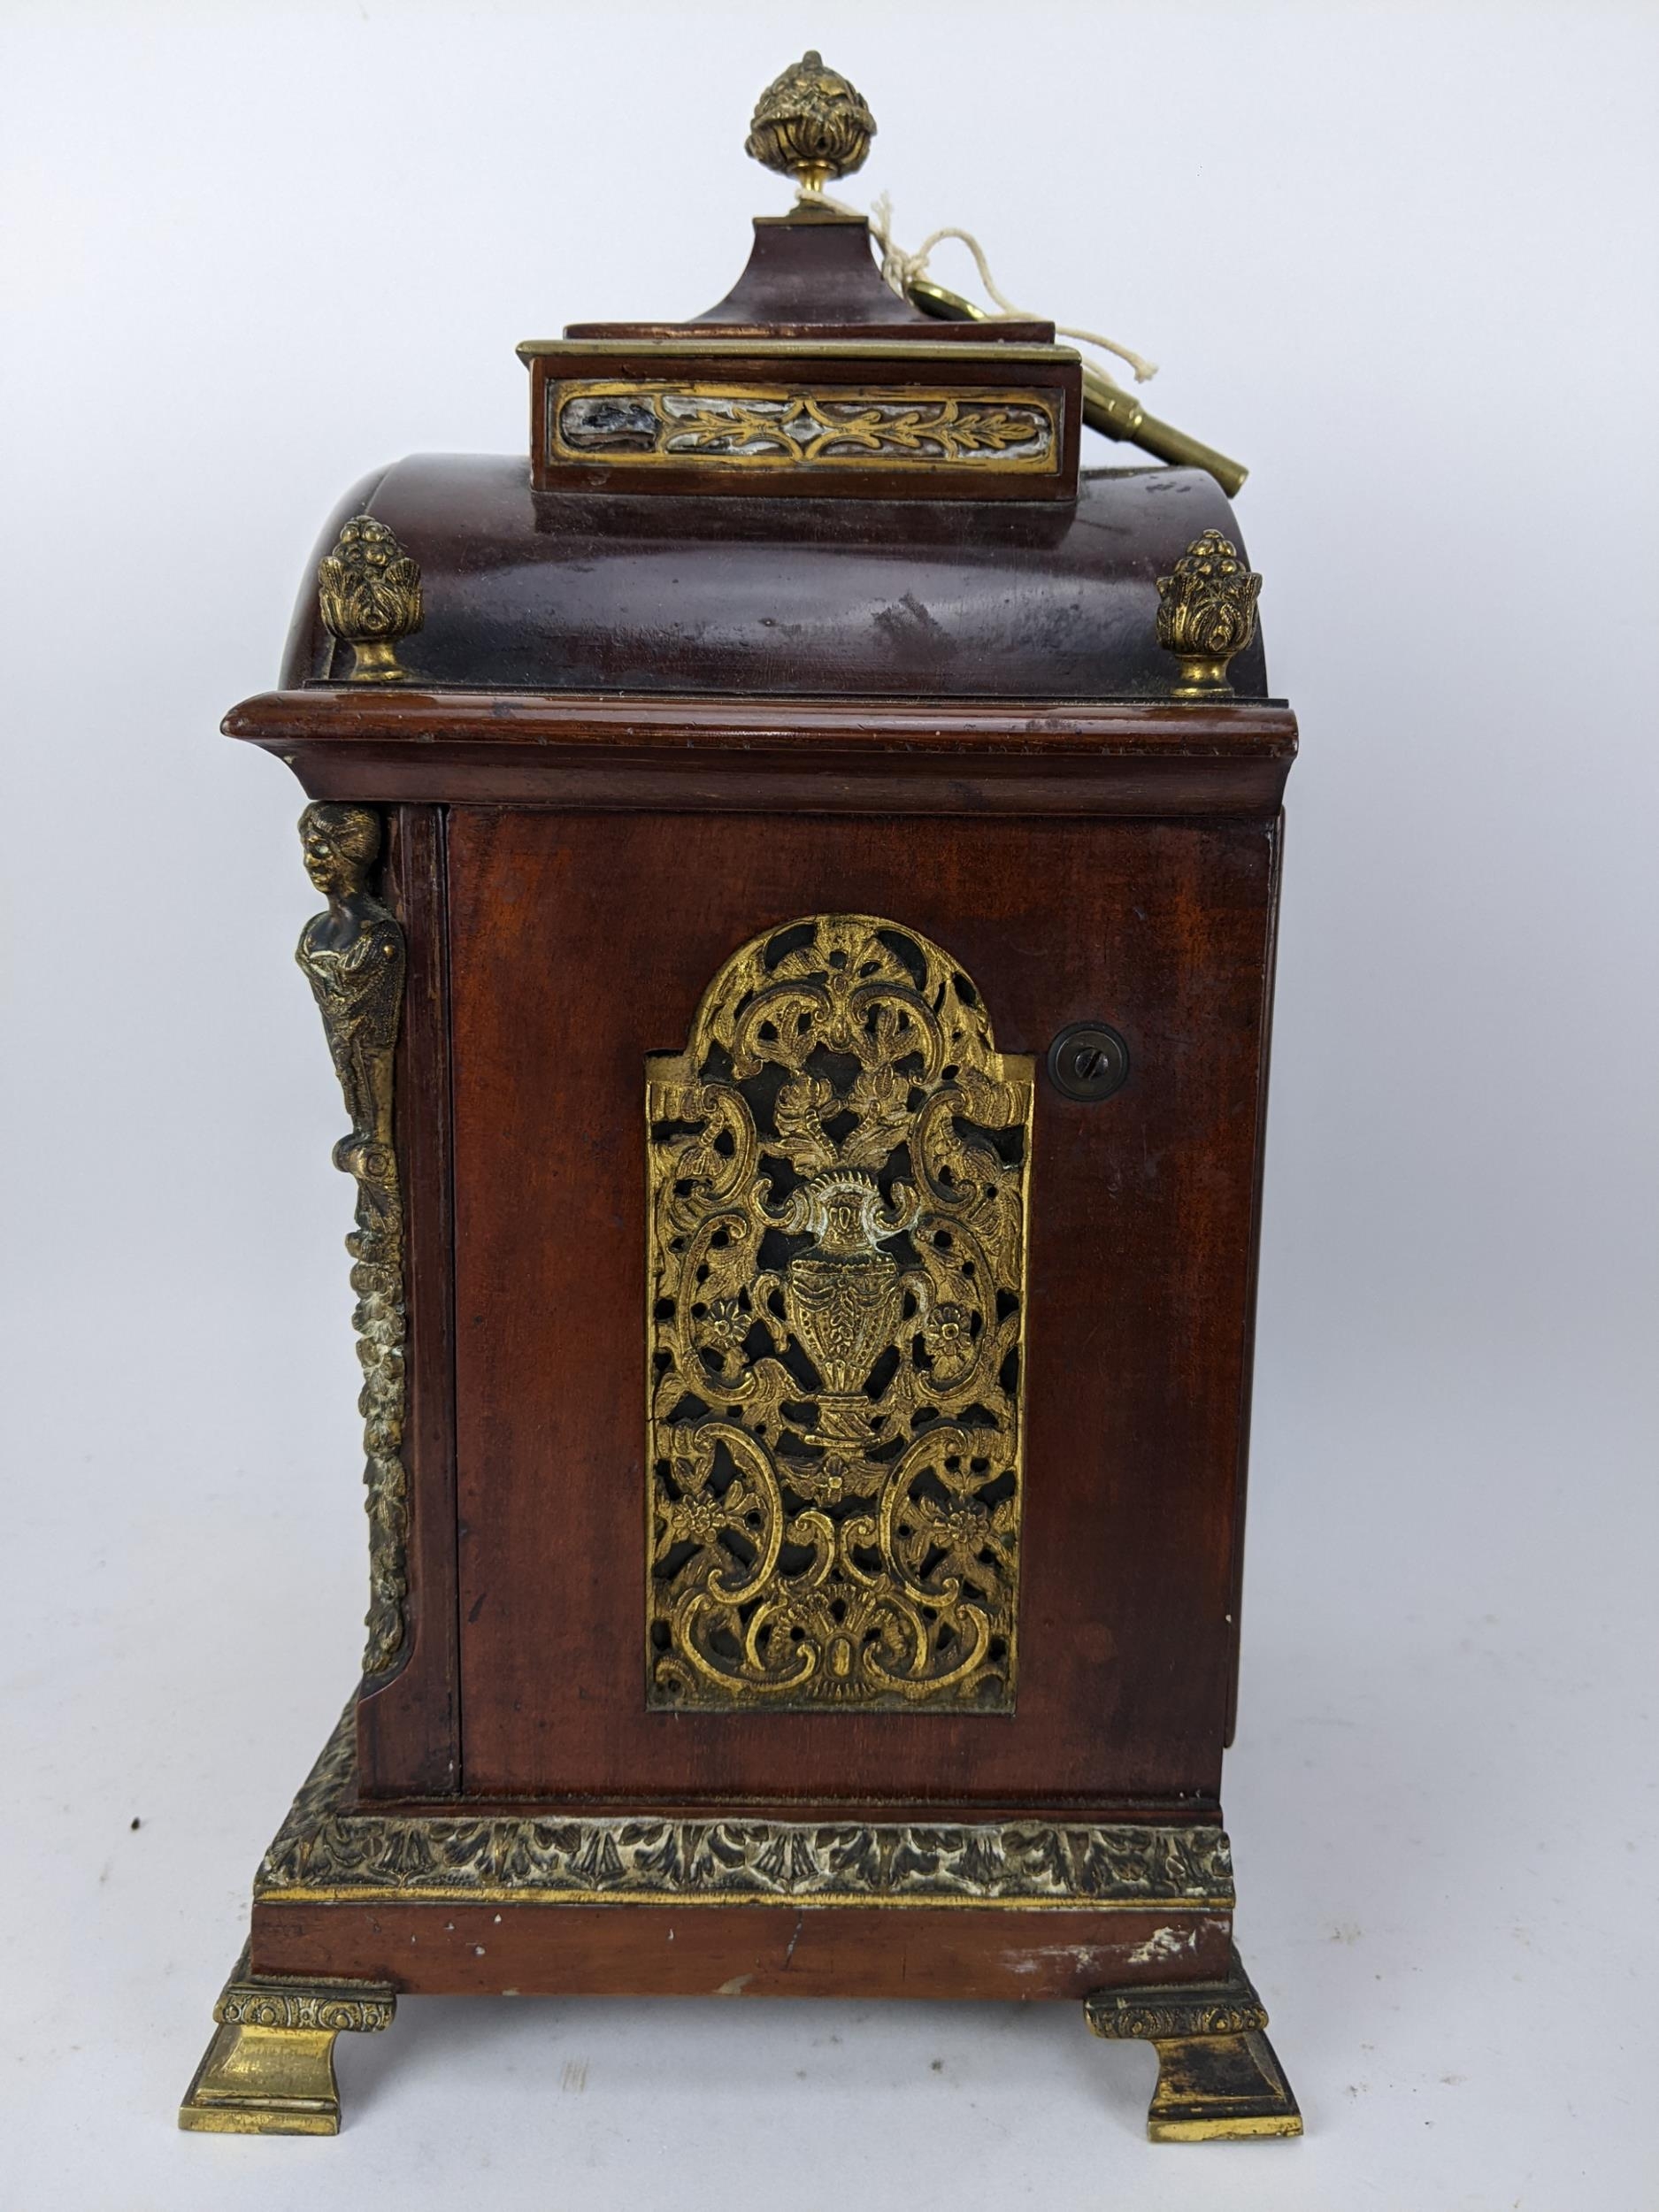 A late 19th/early 20th century mahogany bracket clock, the case having basket of flowers finials, - Image 2 of 5